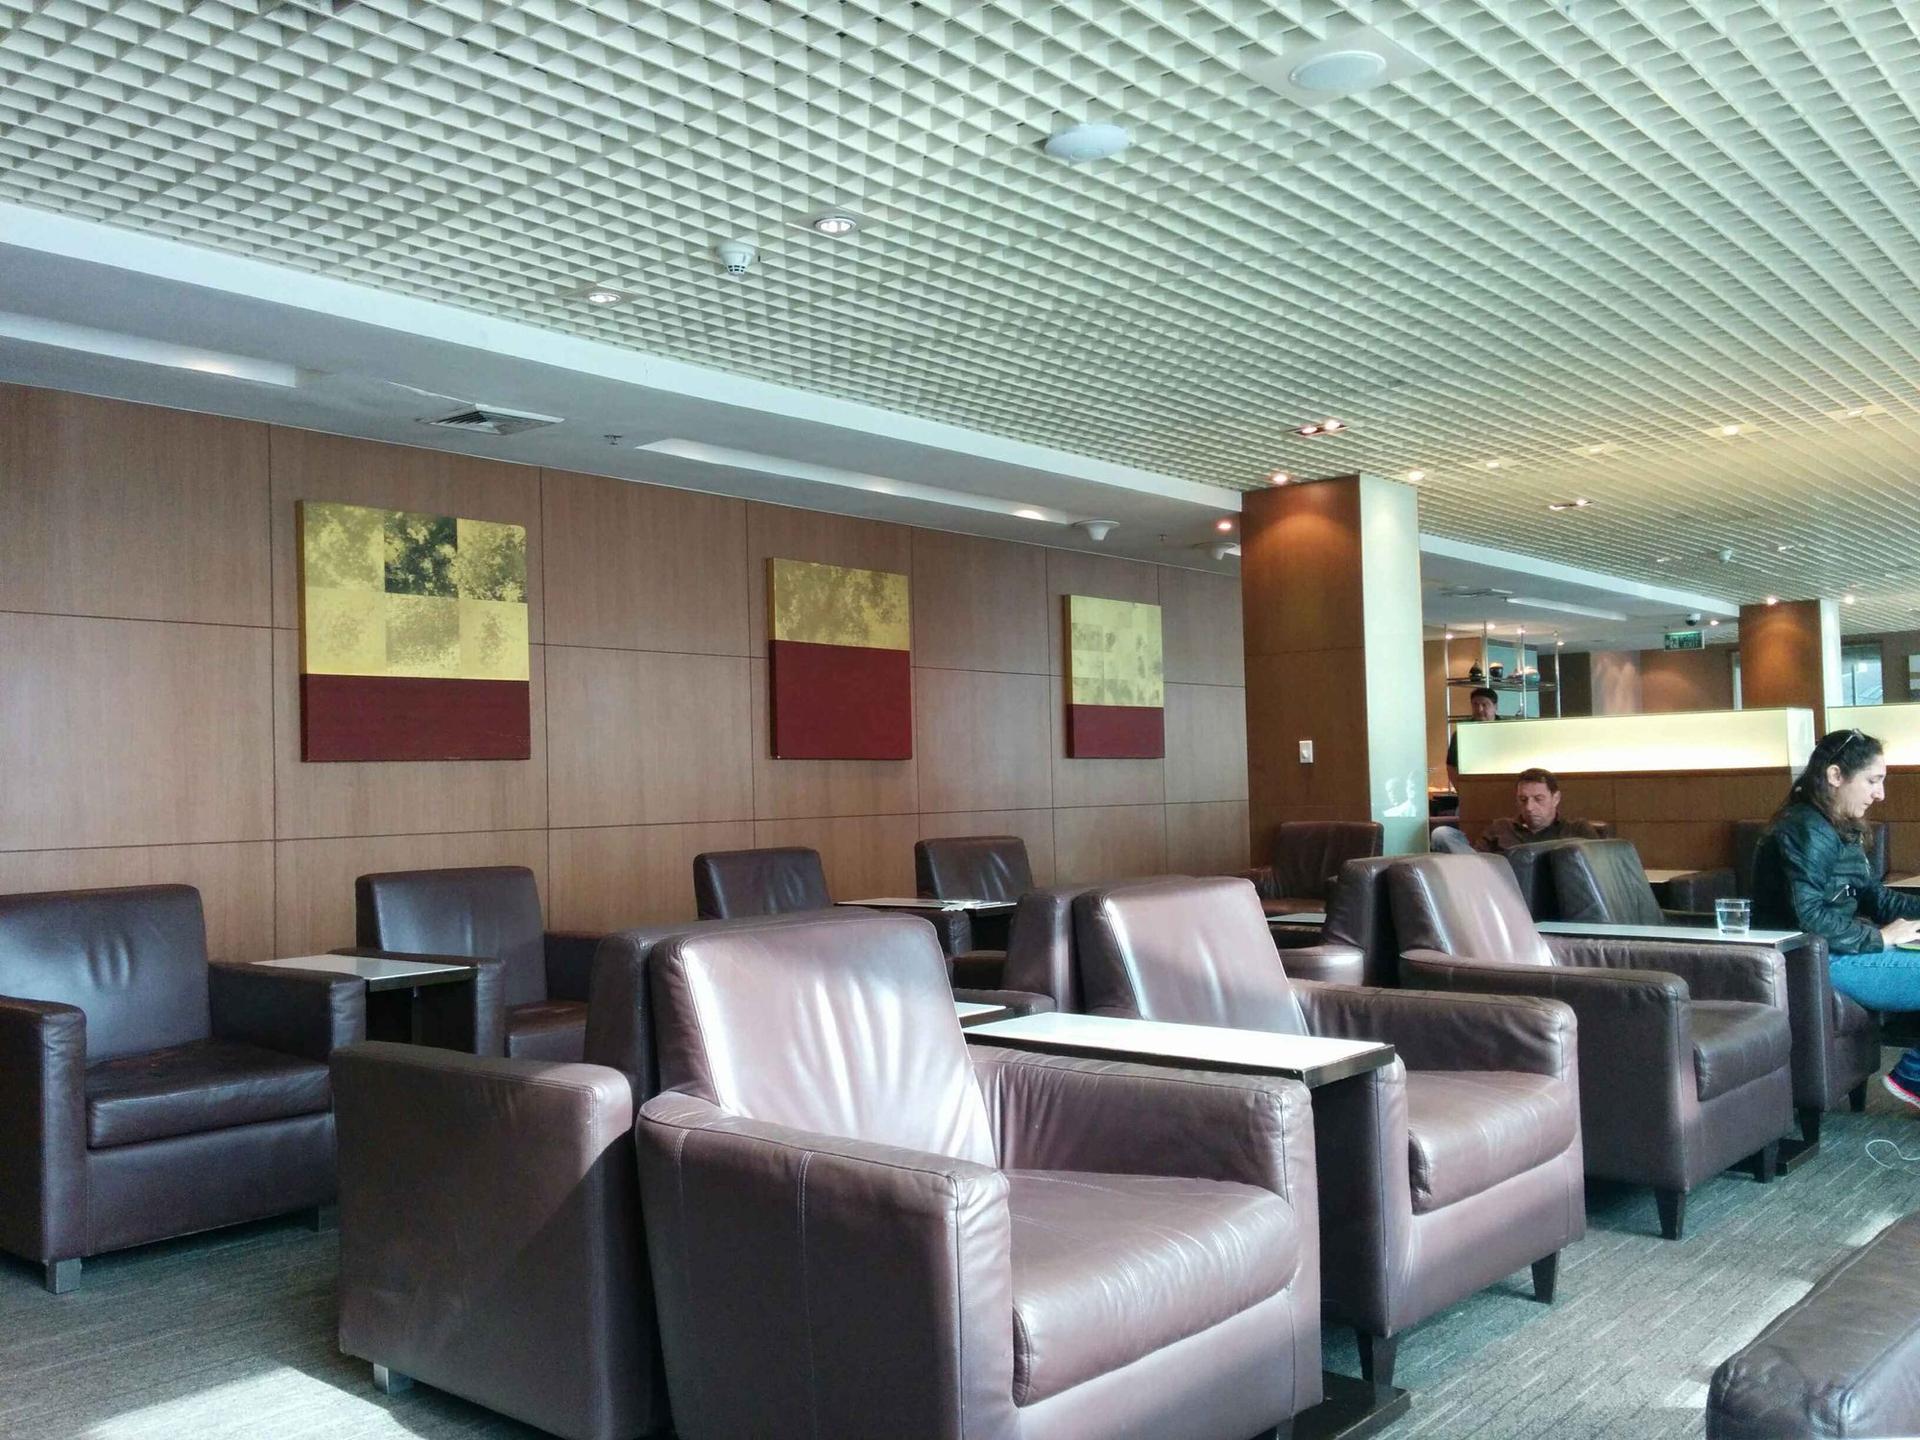 Thai Airways Royal Orchid Lounge image 7 of 15